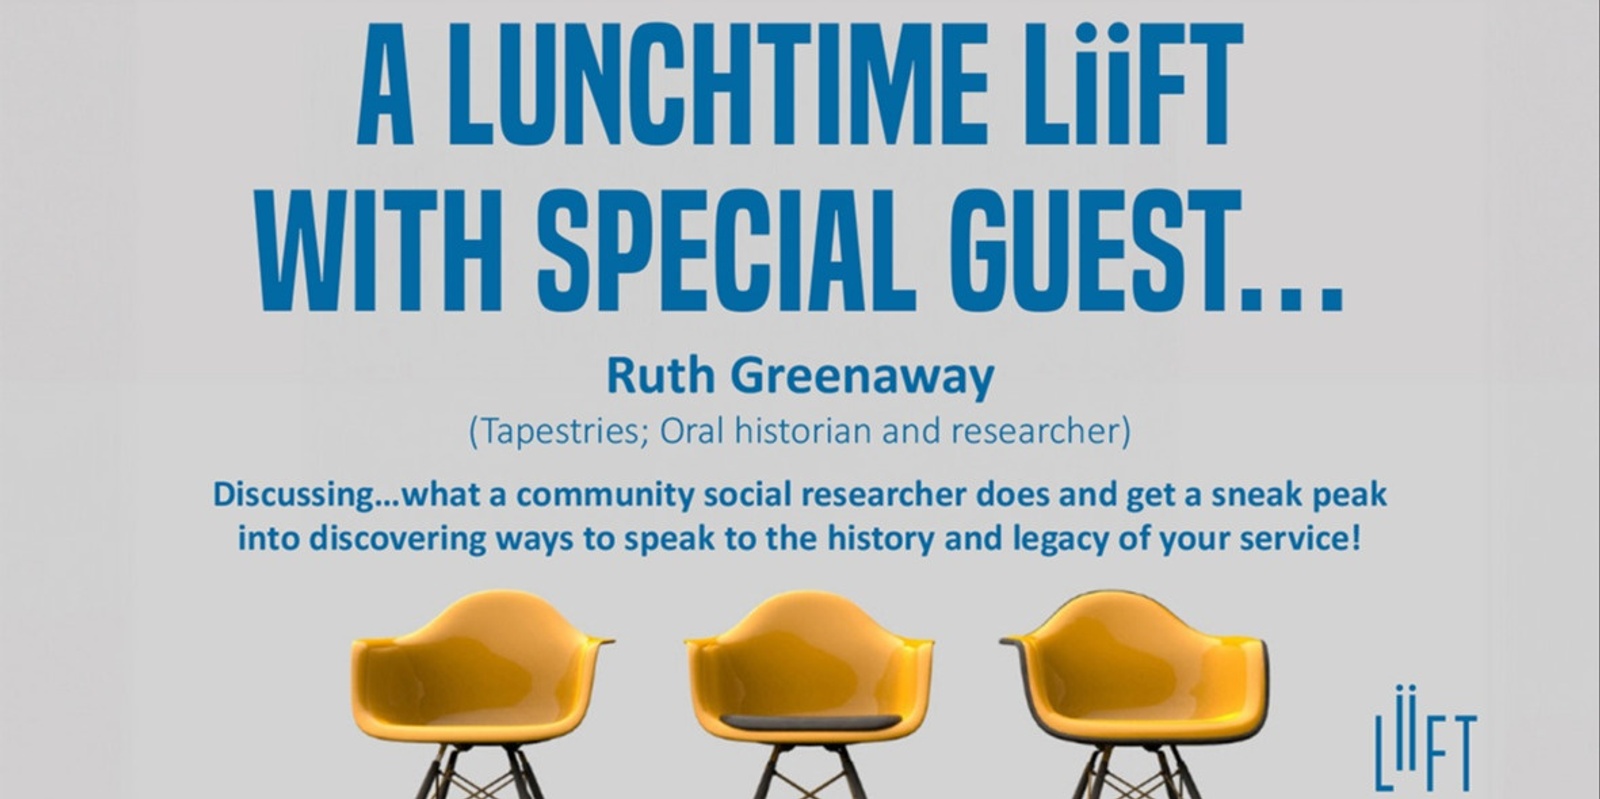 Banner image for A Lunchtime LiiFT with special guest...Ruth Greenaway (Tapestries; Oral historian and researcher) discussing...what a community social researcher does and get a sneak peak into discovering ways to speak to the history and legacy of your service!